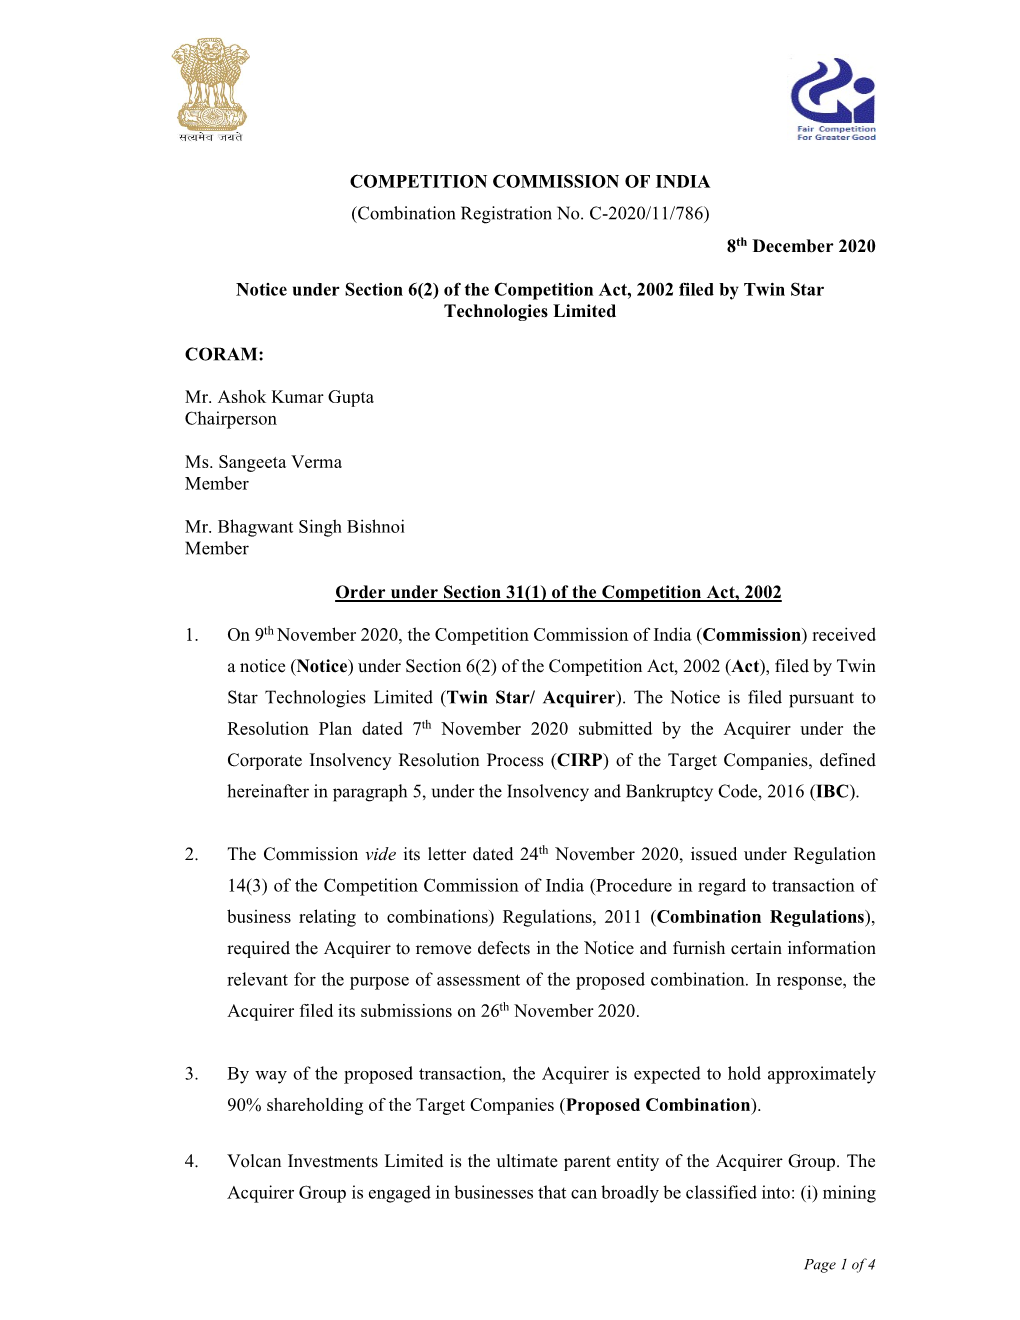 COMPETITION COMMISSION of INDIA (Combination Registration No. C-2020/11/786) 8Th December 2020 Notice Under Section 6(2) Of